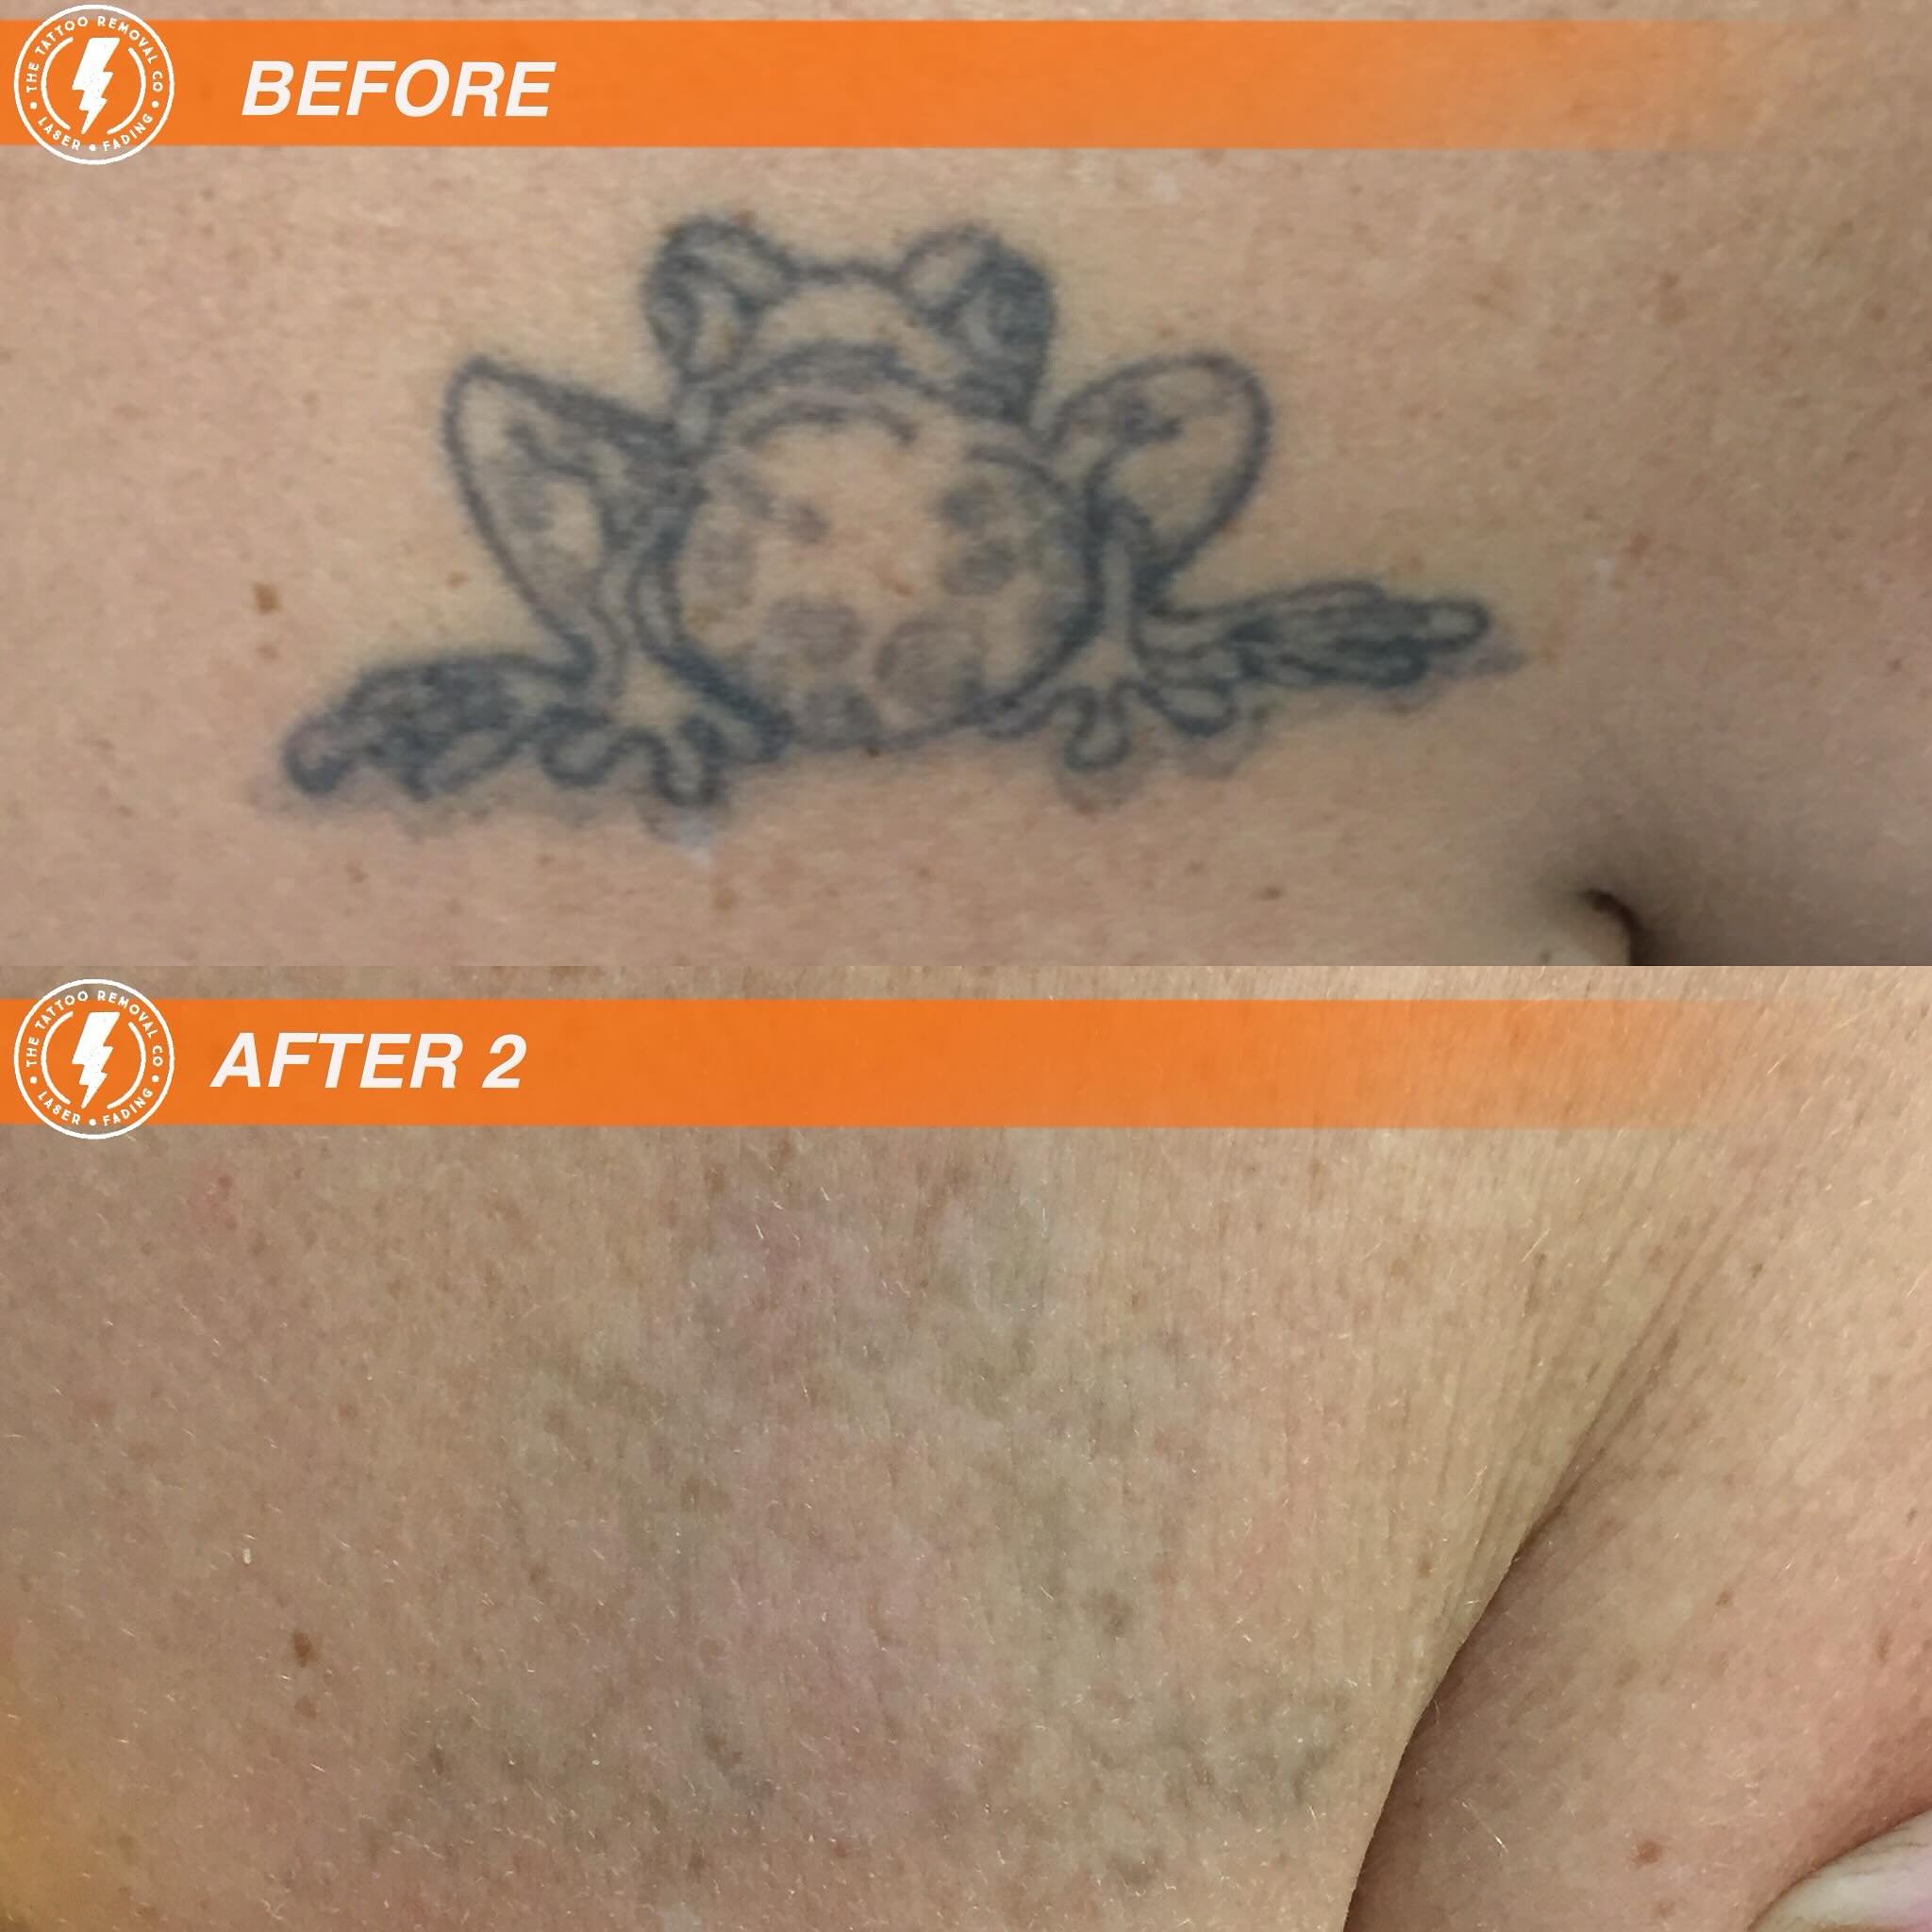 BEFORE/AFTER 2 TREATMENTS💥

We really rrrrriiiiibbbbit that one 🐸

⚡️Fabulous result so far. These are the results you get with our experienced and knowledgeable Laser Technician @philly_ttrc_pagdin ⚡️

Consultations are FREE please don&rsquo;t hes